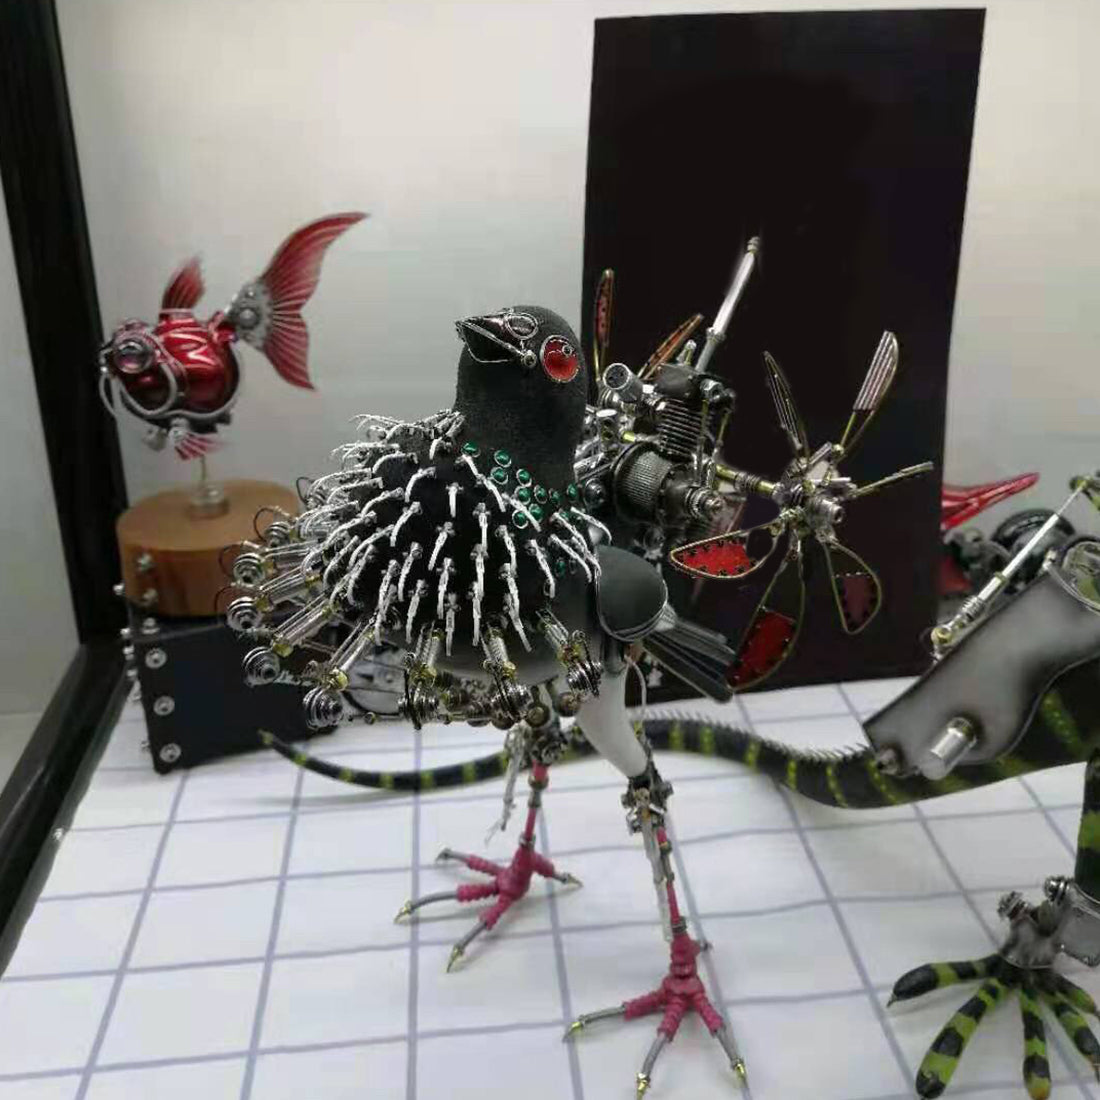 Customized 3D Metal lobster Sculpture  Assembly Model Kits Crafts for Home Decor Collection Display